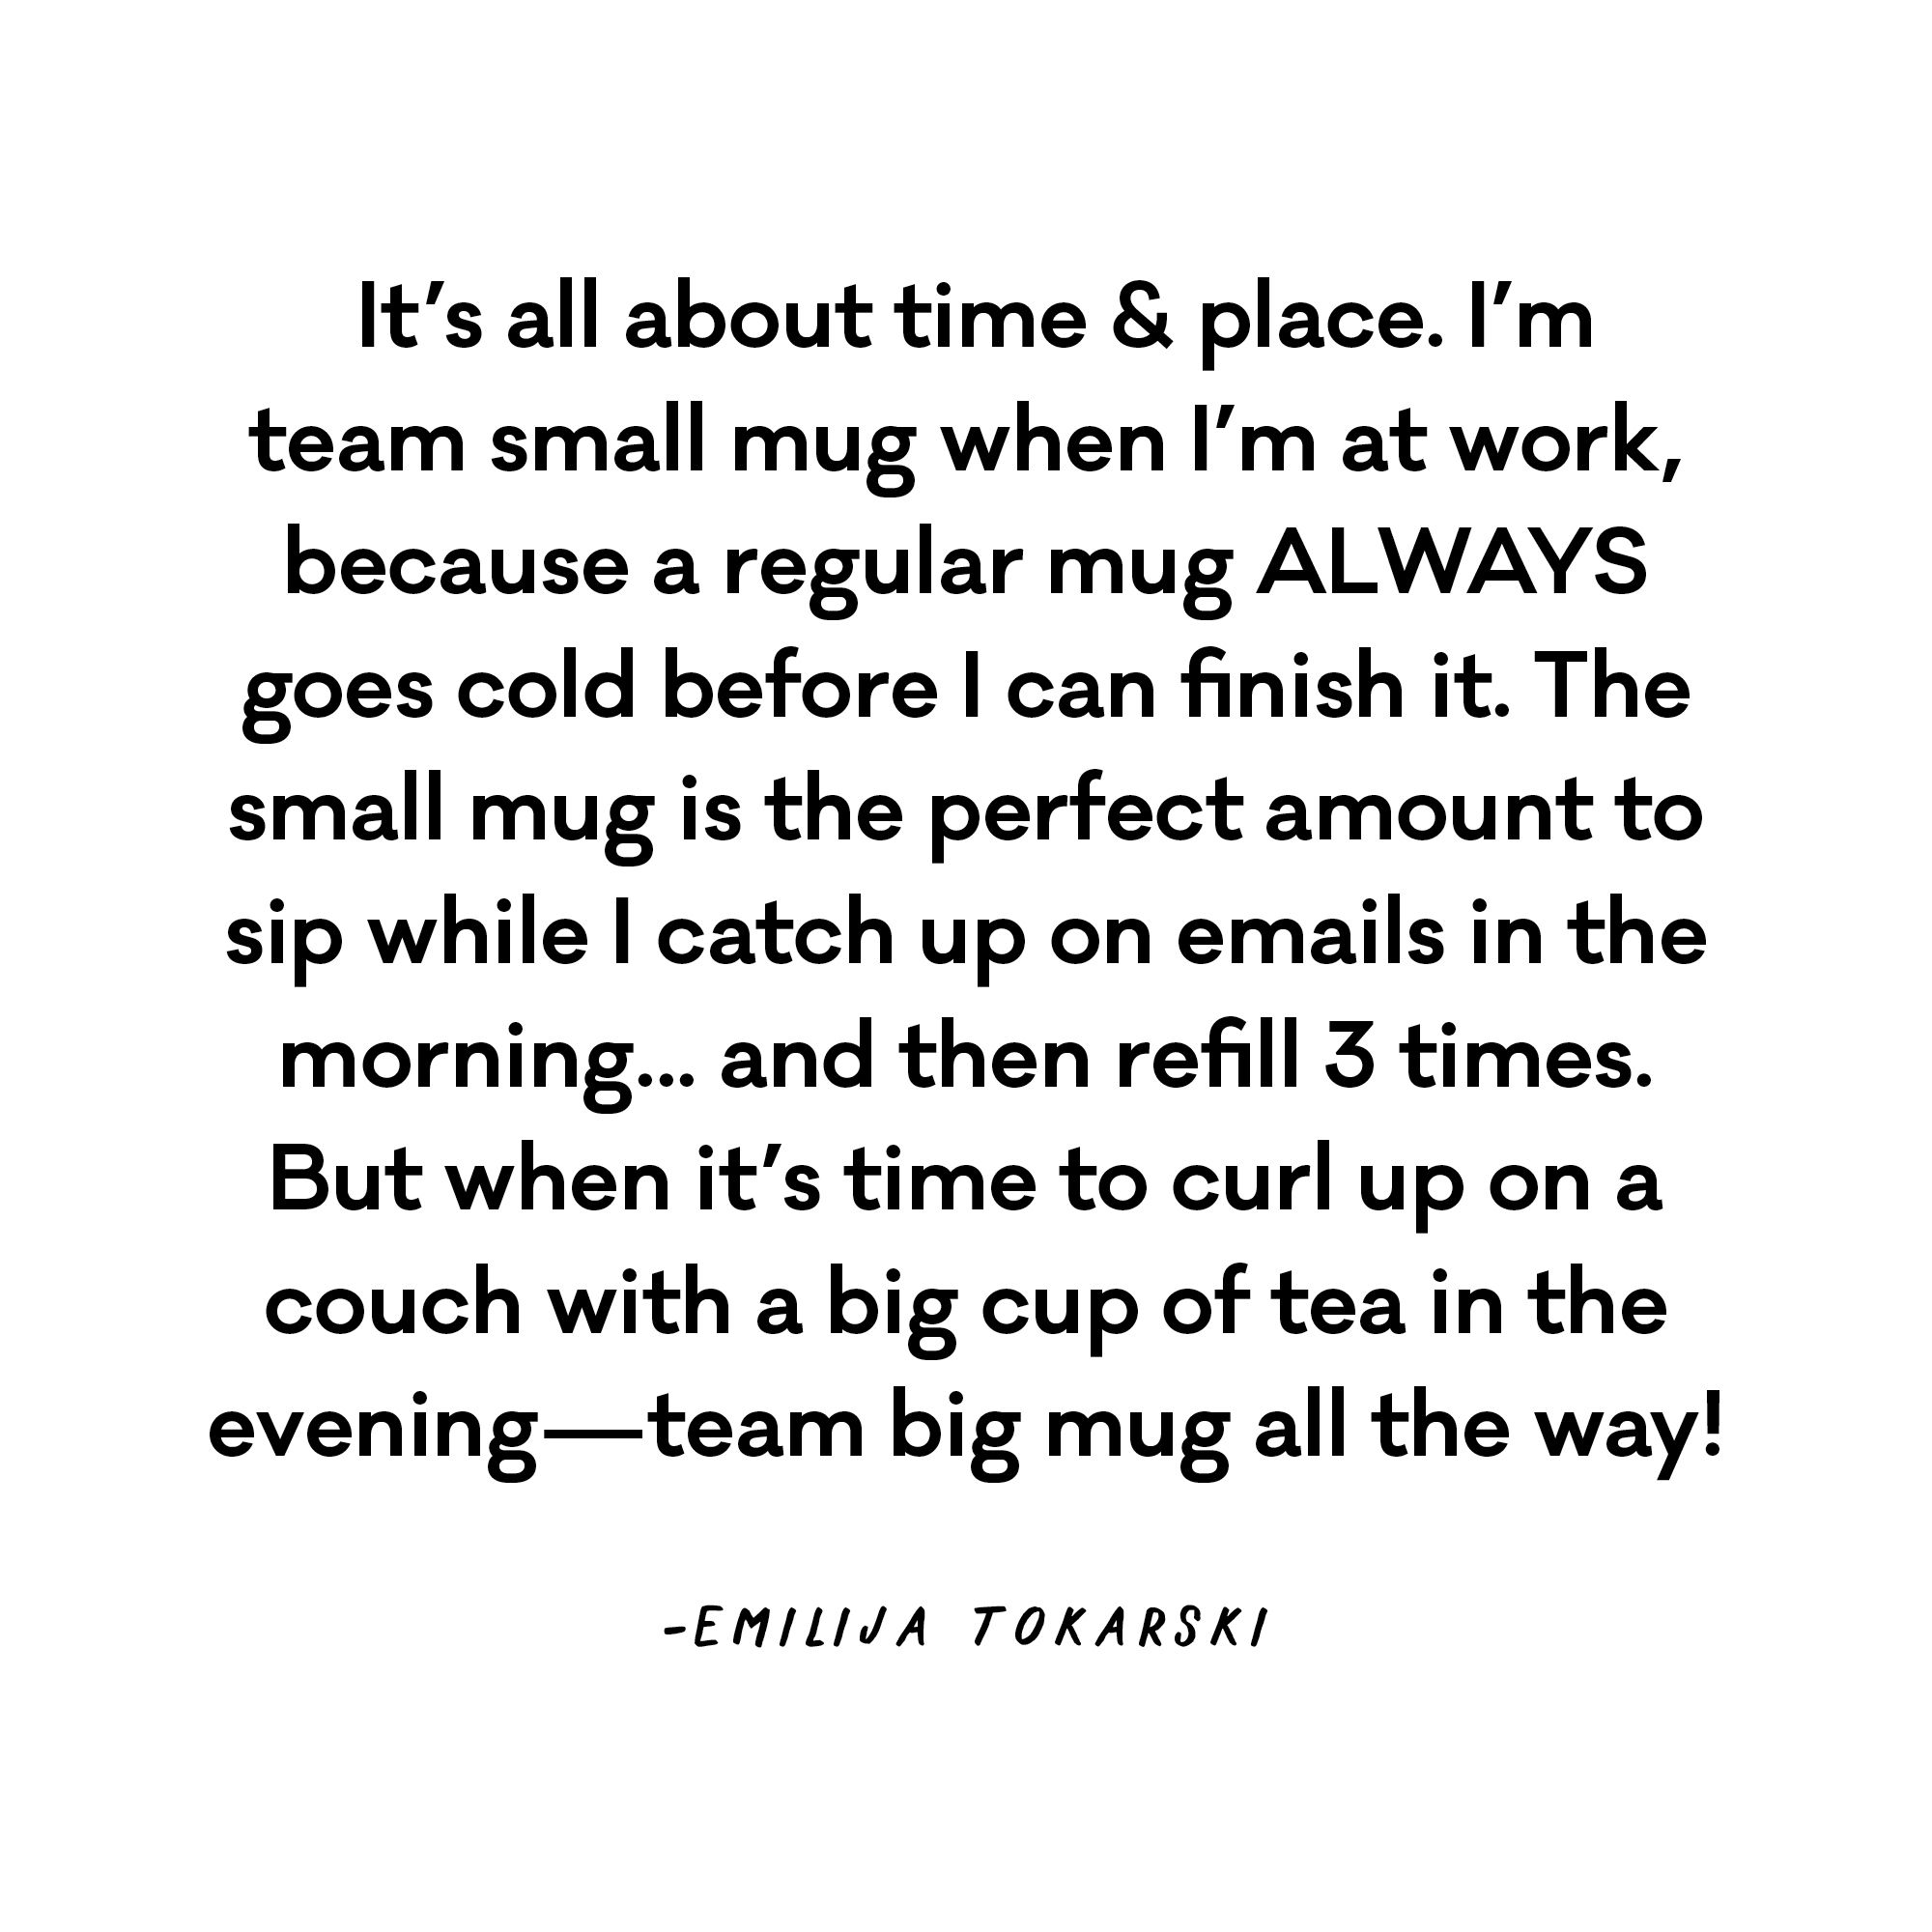  It's all about time & place. I'm team small mug when I'm at work, because a regular mug ALWAYS goes cold before I can finish it. The small mug is the perfect amount to sip while I catch up on emails in the morning... and then refill 3 times. But when it's time to curl up on a couch with a big cup of tea in the evening - team big mug all the way! - Emilija Tokarski